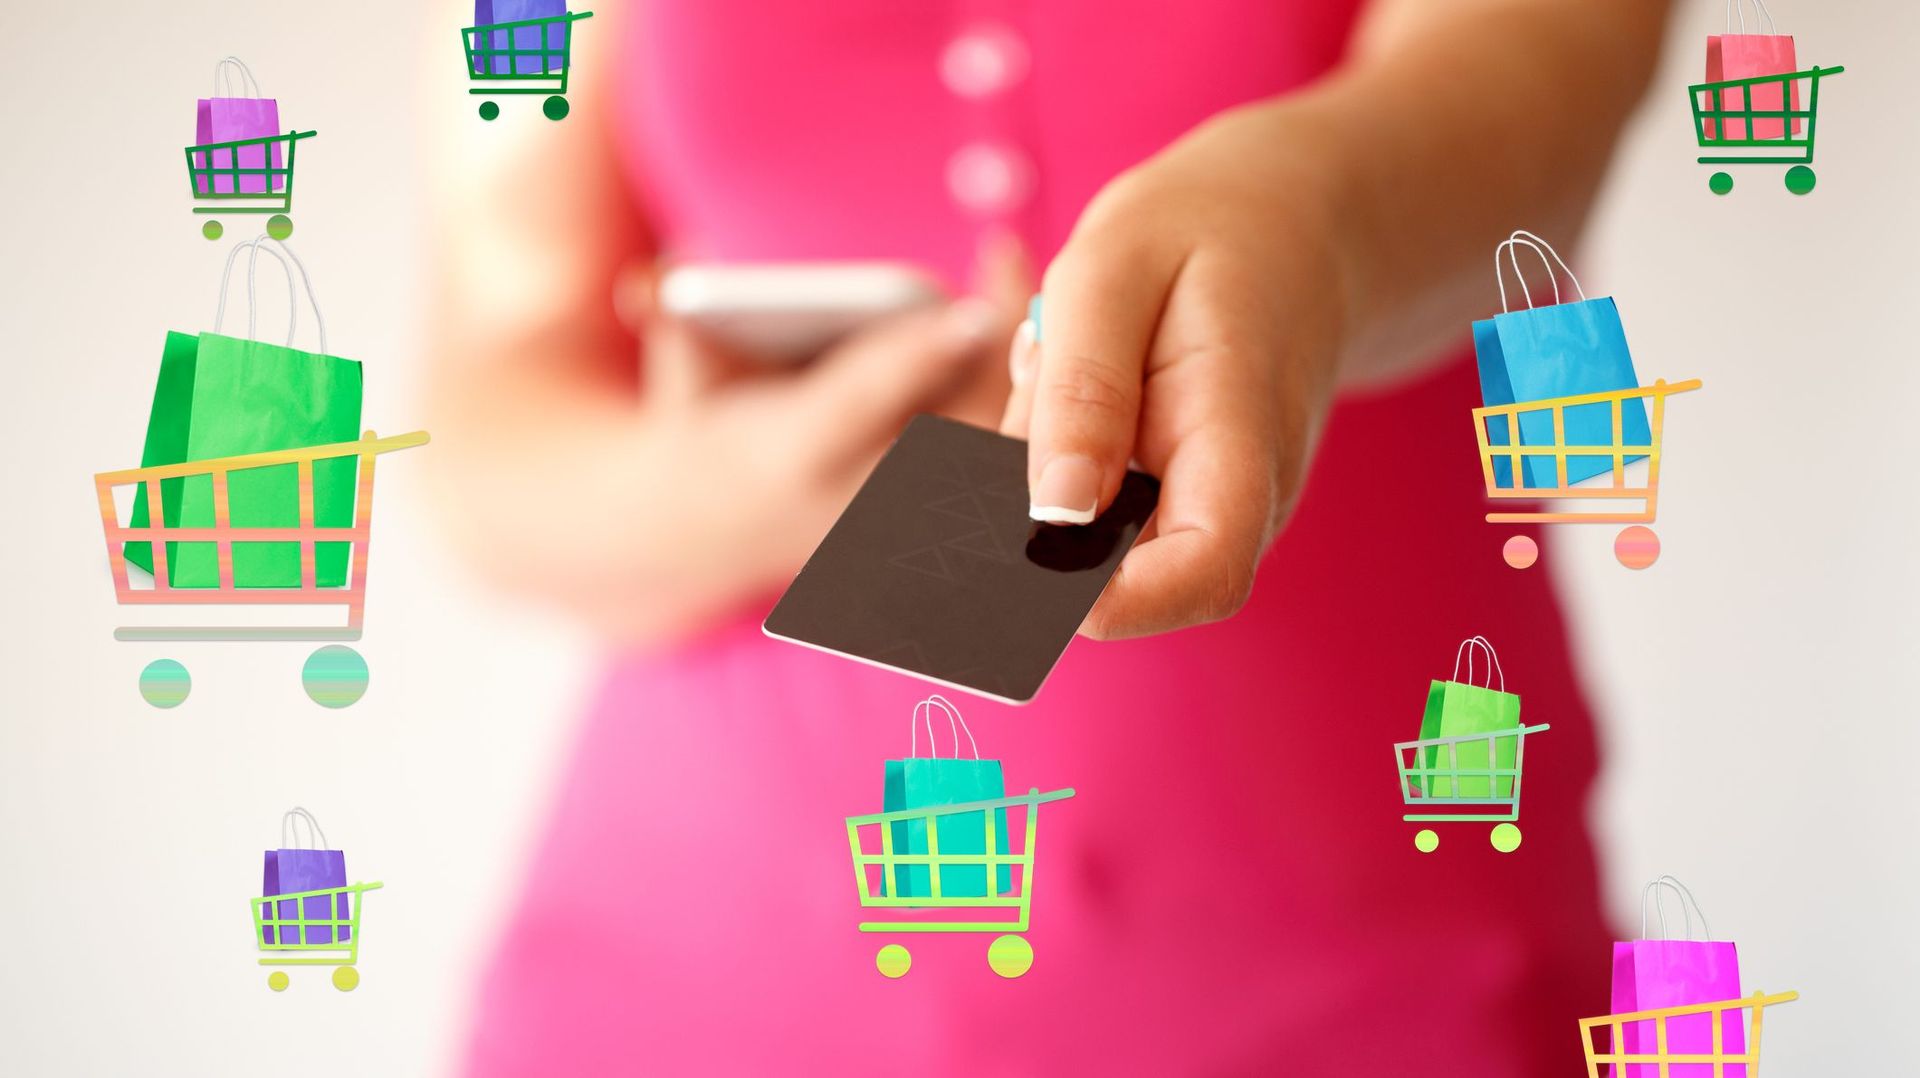 online shopping. close-up of hands using touch screen smartphone and holding credit card